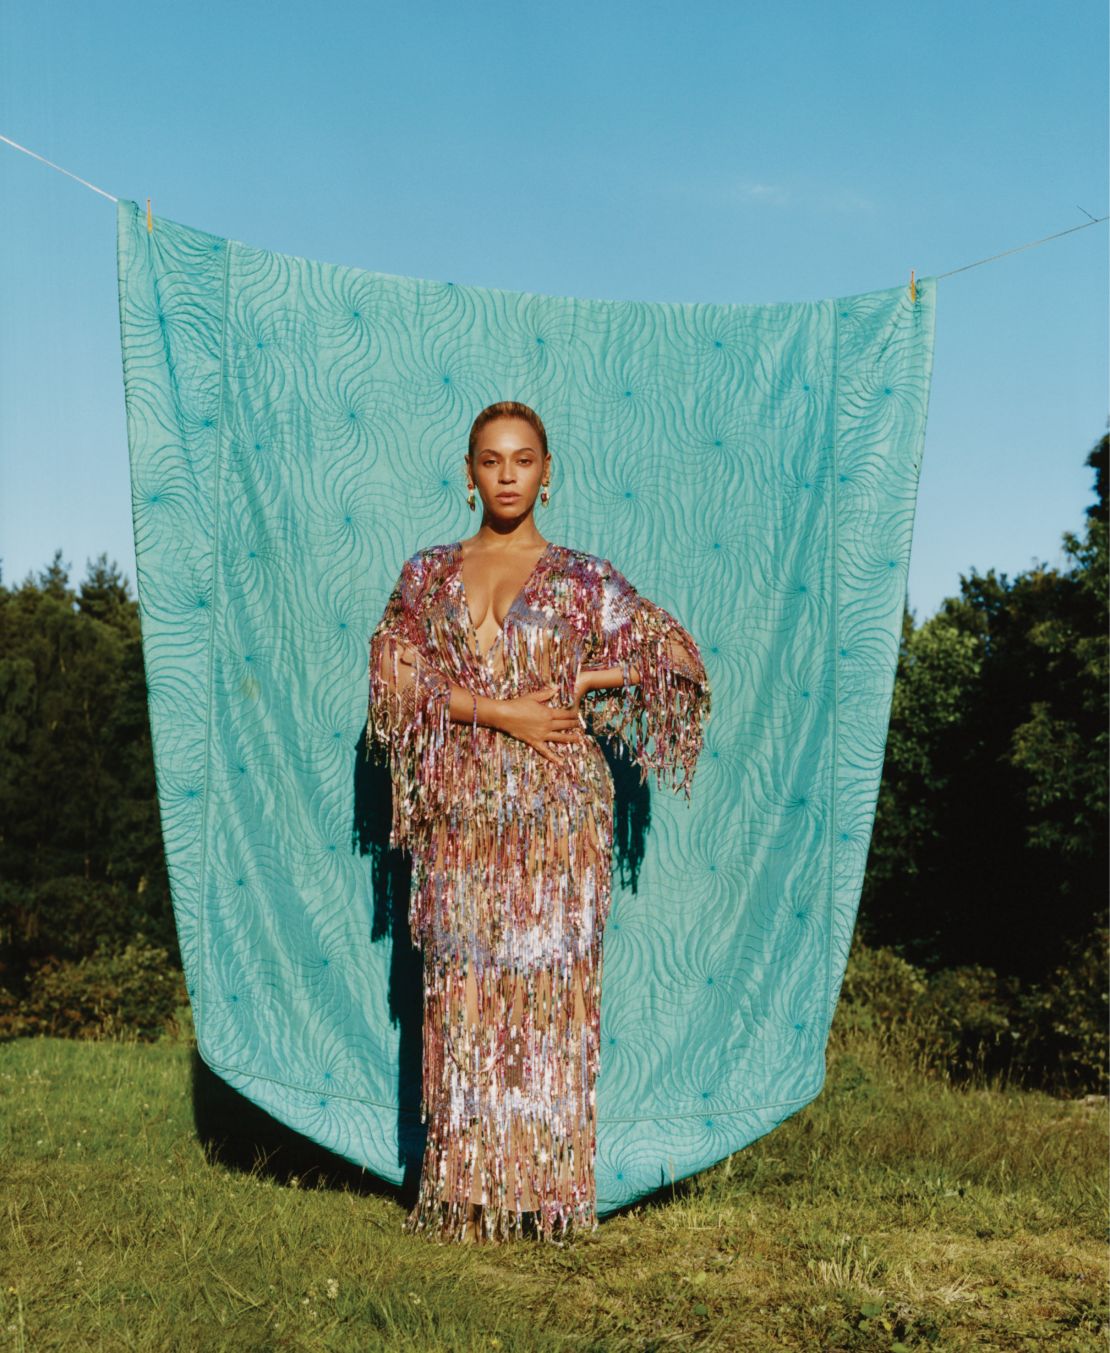 Beyoncé's cover shoot for American Vogue's September issue was shot photographer Tyler Mitchell, the first black photographer to shoot a cover for the title.